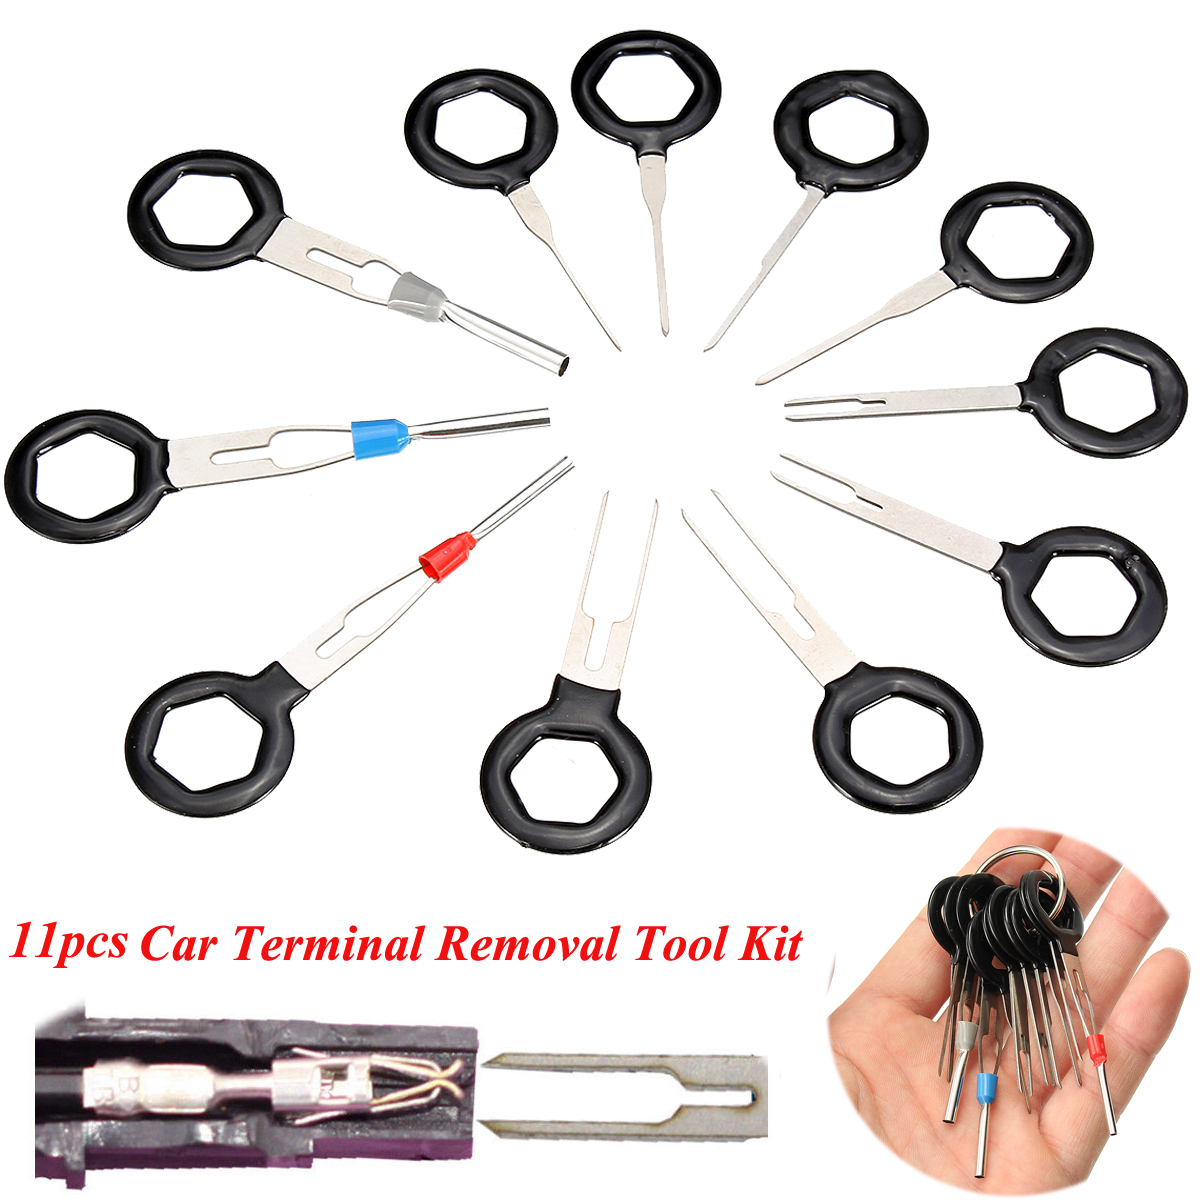 Excellwayreg-11Pcs-Terminal-Removal-Tool-Kit-Wiring-Connector-Pin-Release-Extractor-1179384-6